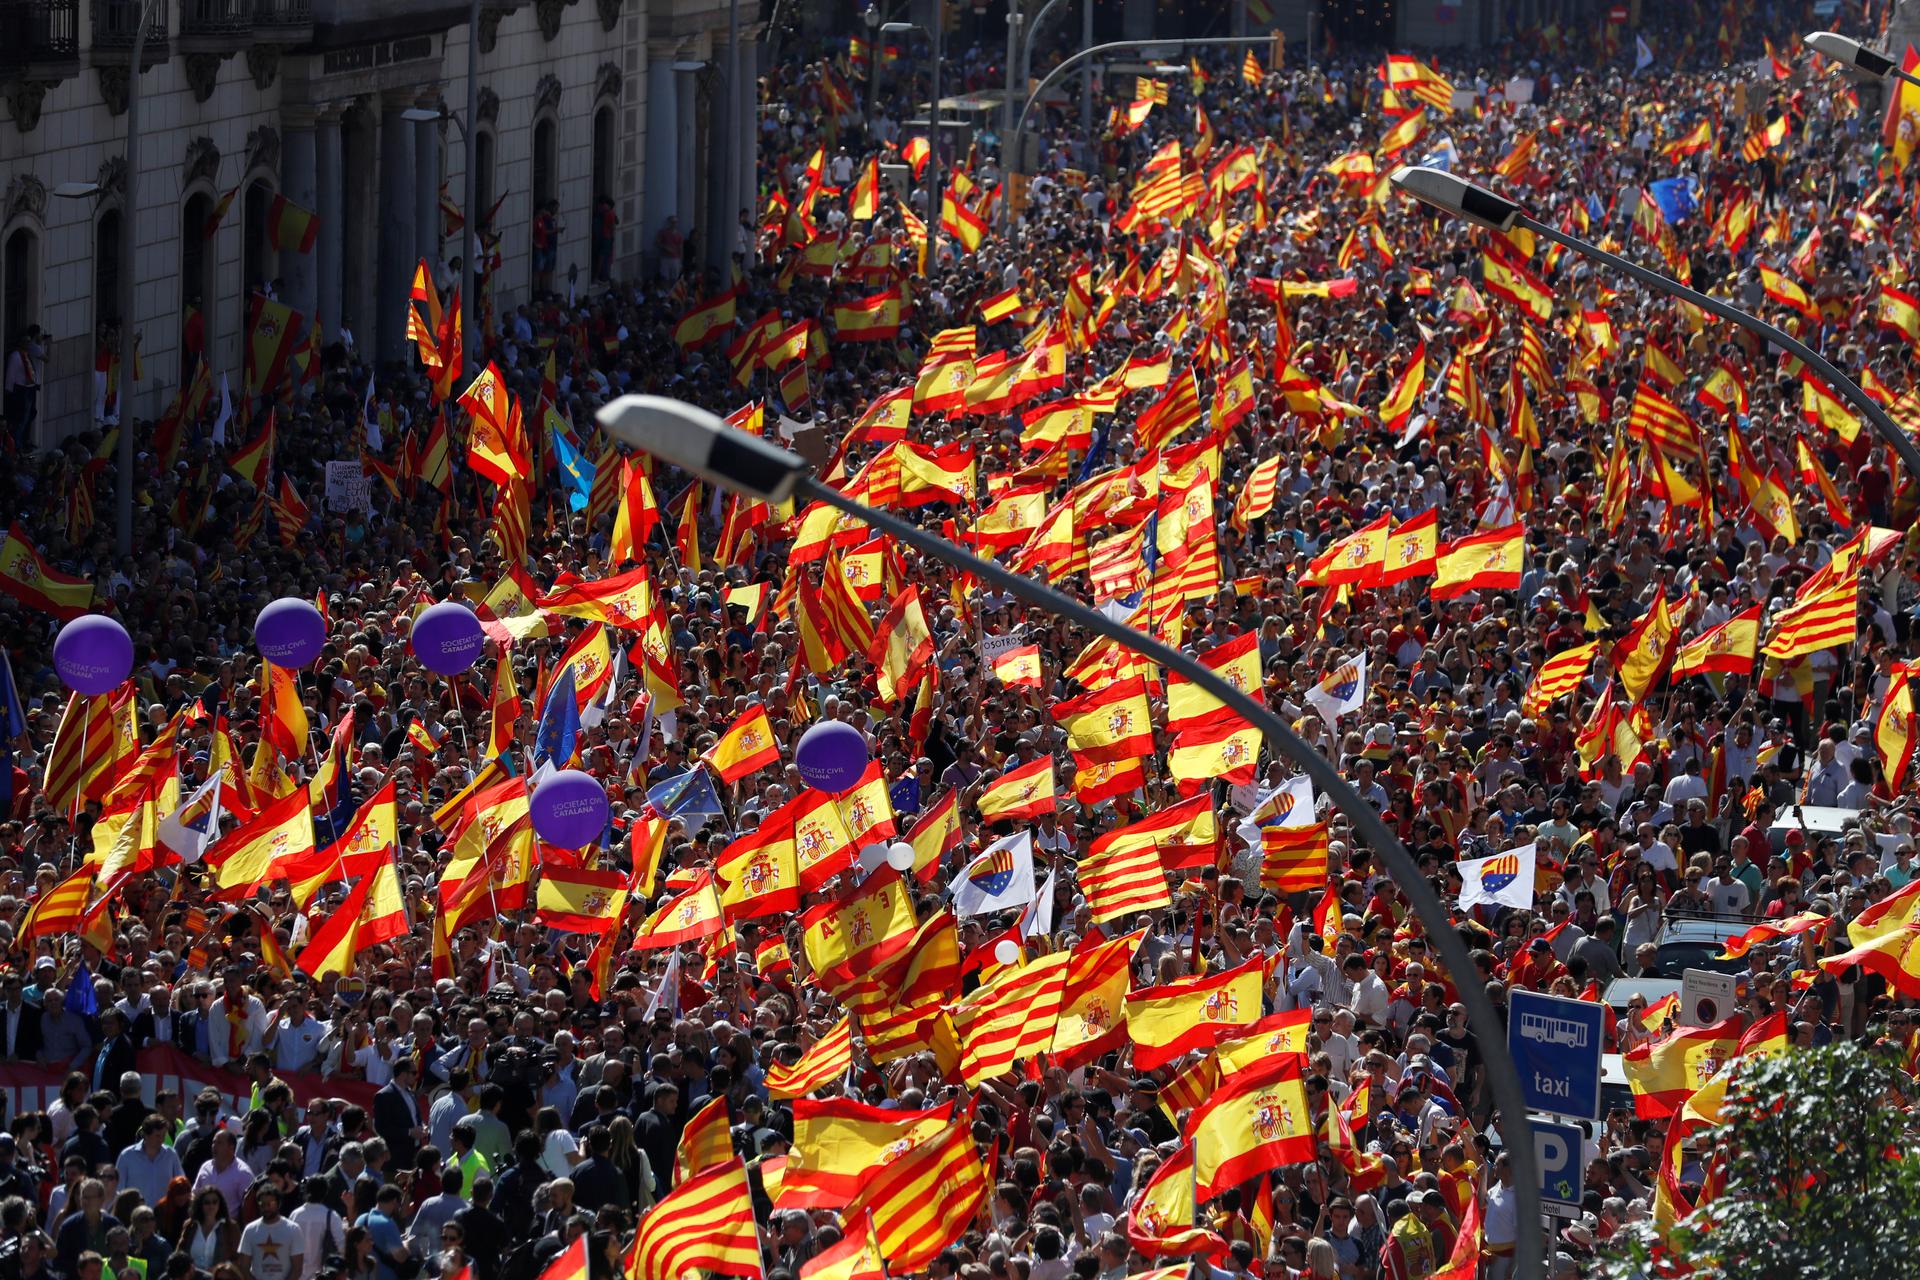 A pro-union demonstration organised by the Catalan Civil Society organisation makes its way through the streets of Barcelona, Spain October 8, 2017.